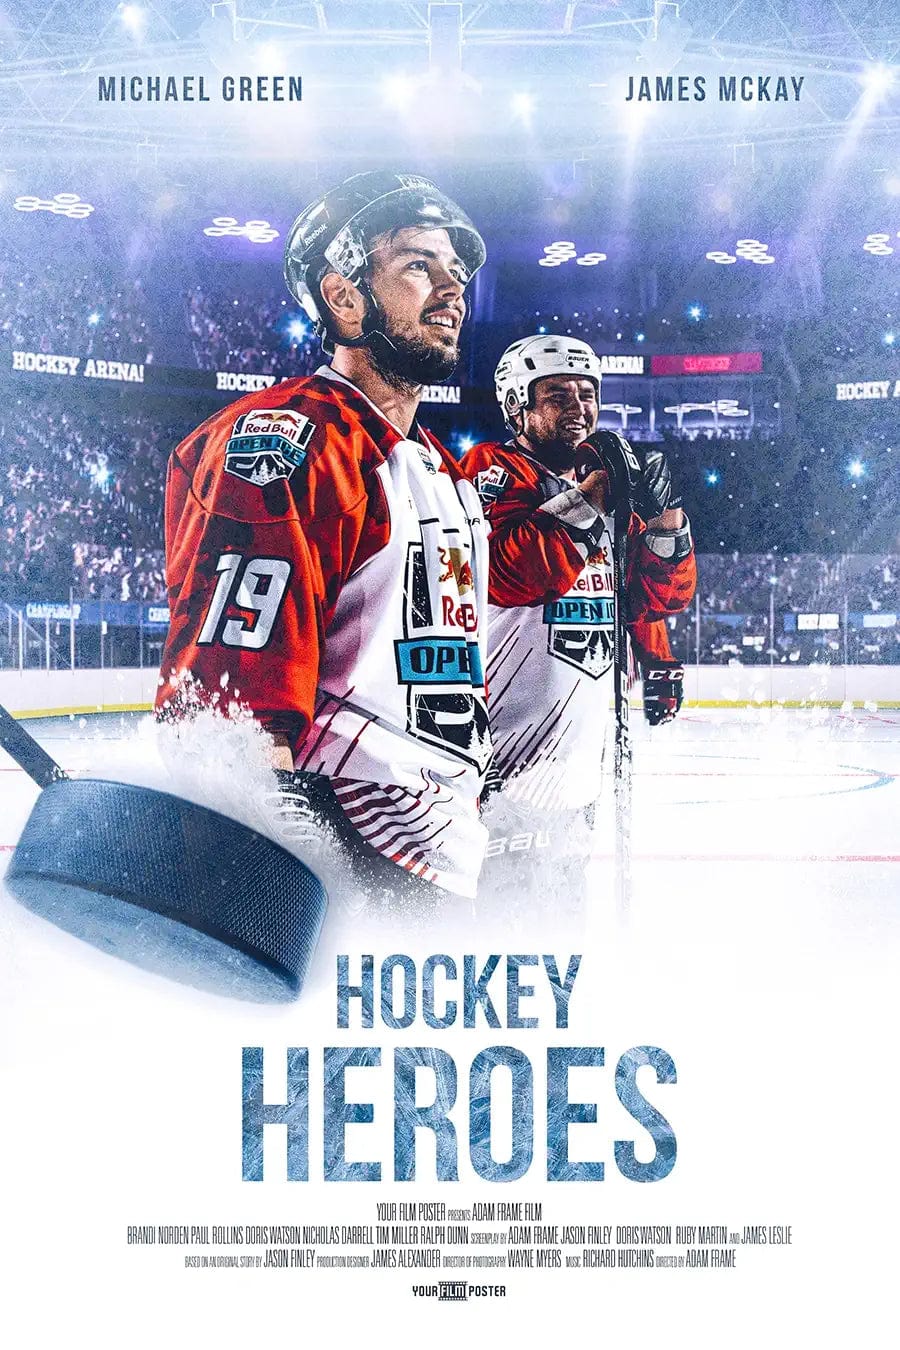 ice hockey themed personalized movie poster, showing two men in an ice hockey stadium